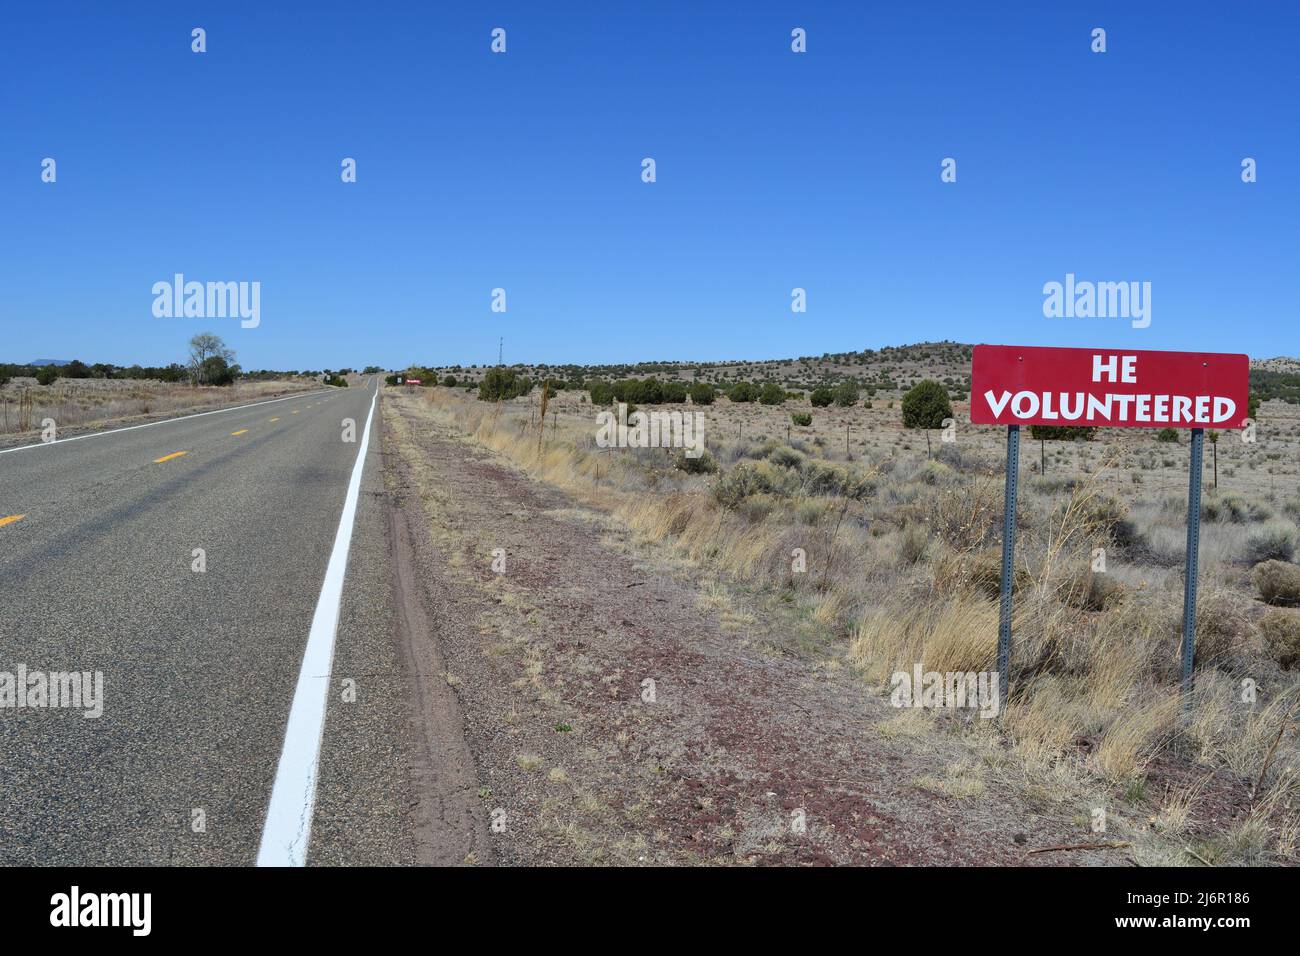 Legendary Burma Shave adverts on Route 66 Stock Photo